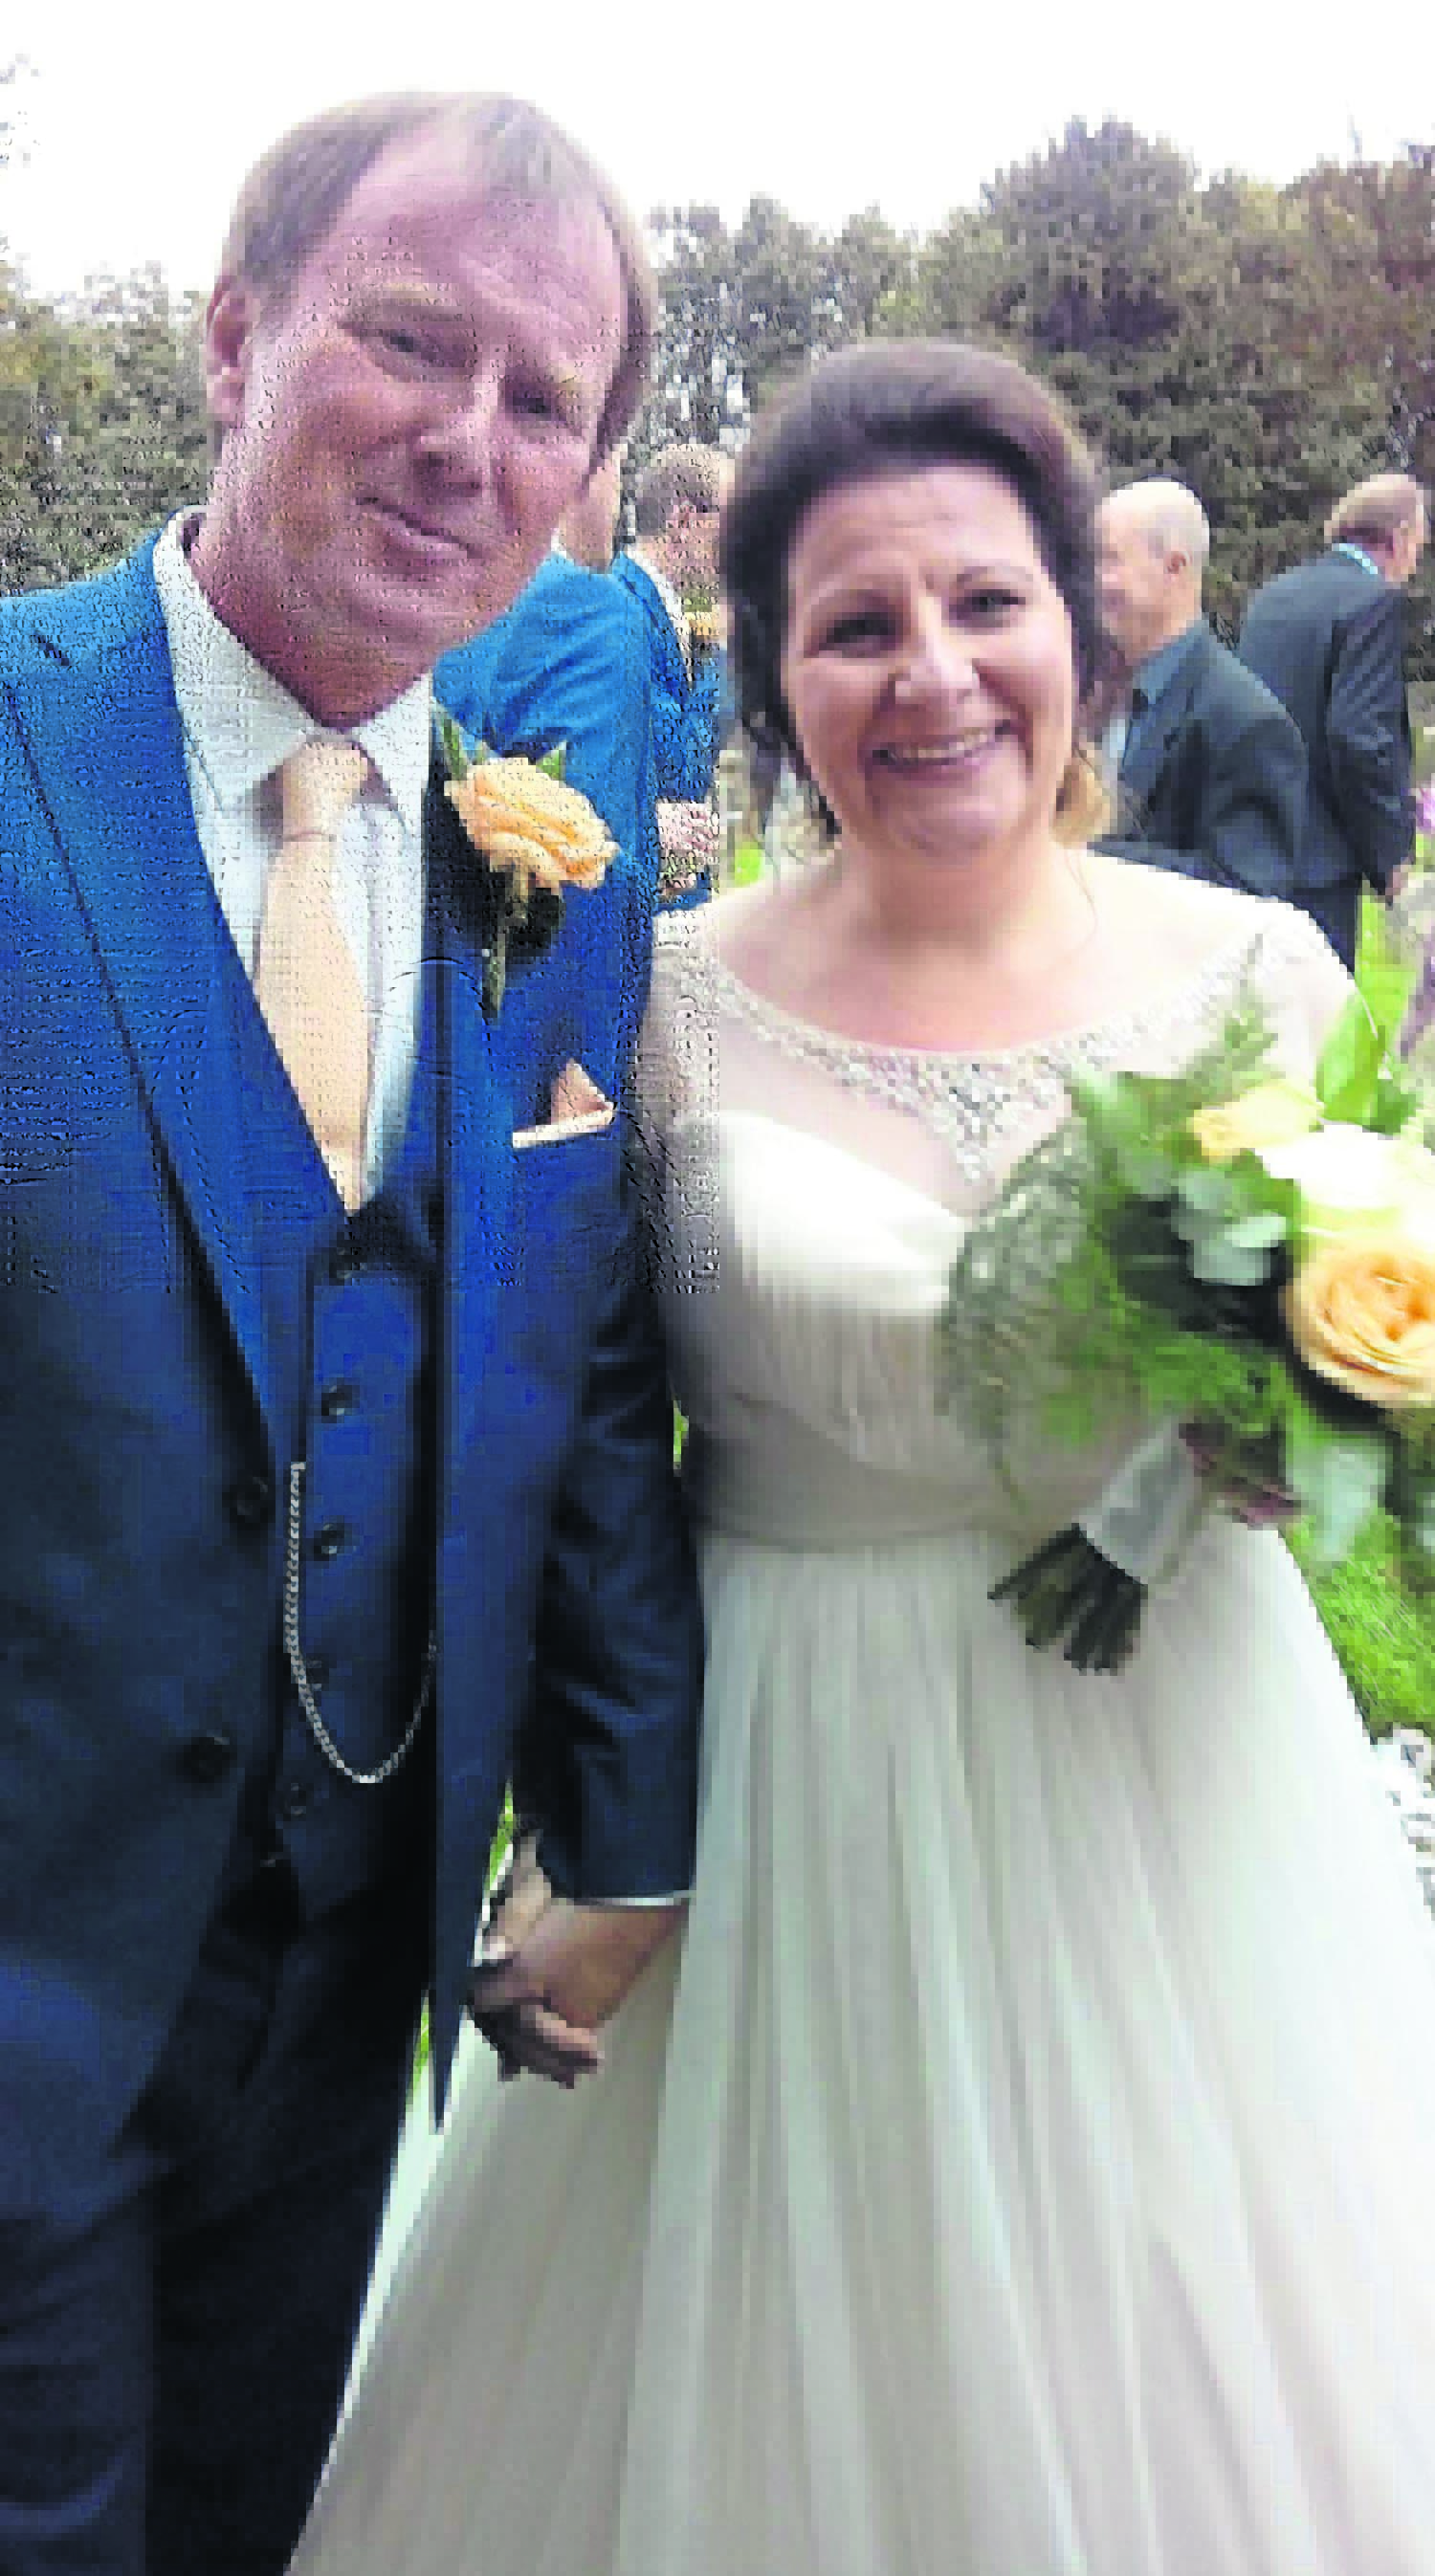 Local Couple Wed at St. Andrew’s